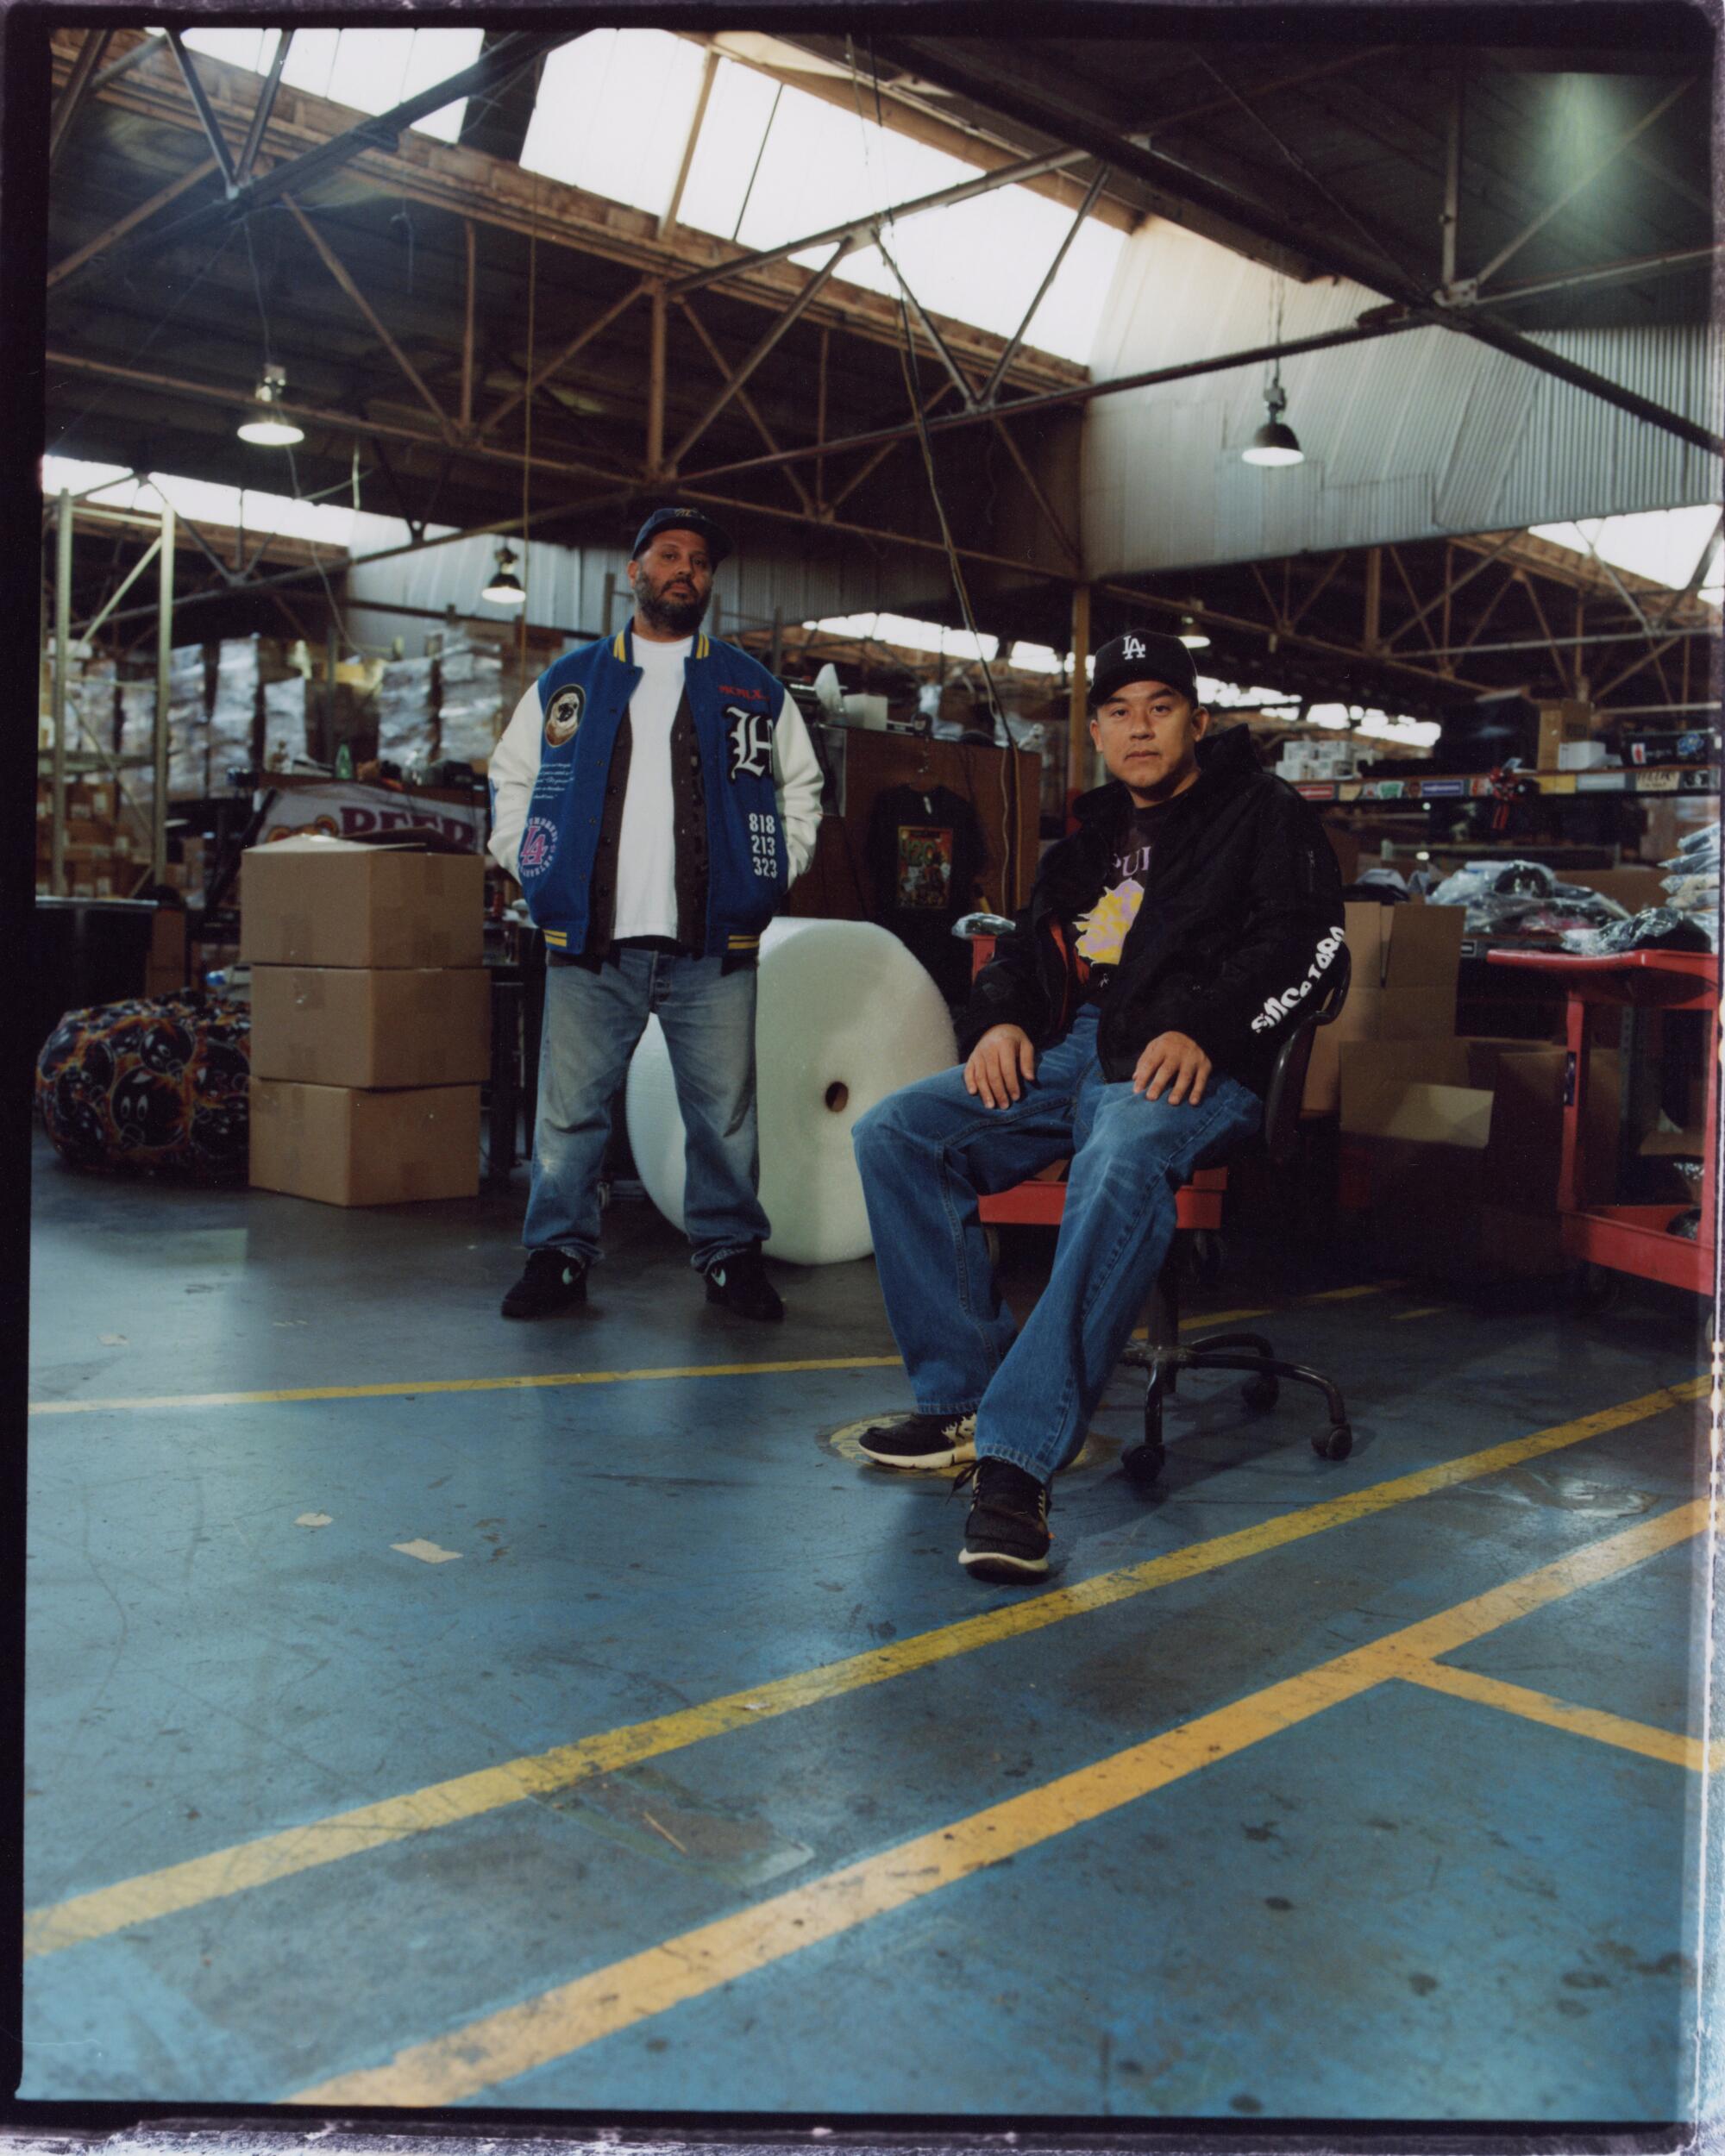 Two men in a warehouse filled with boxes and furniture